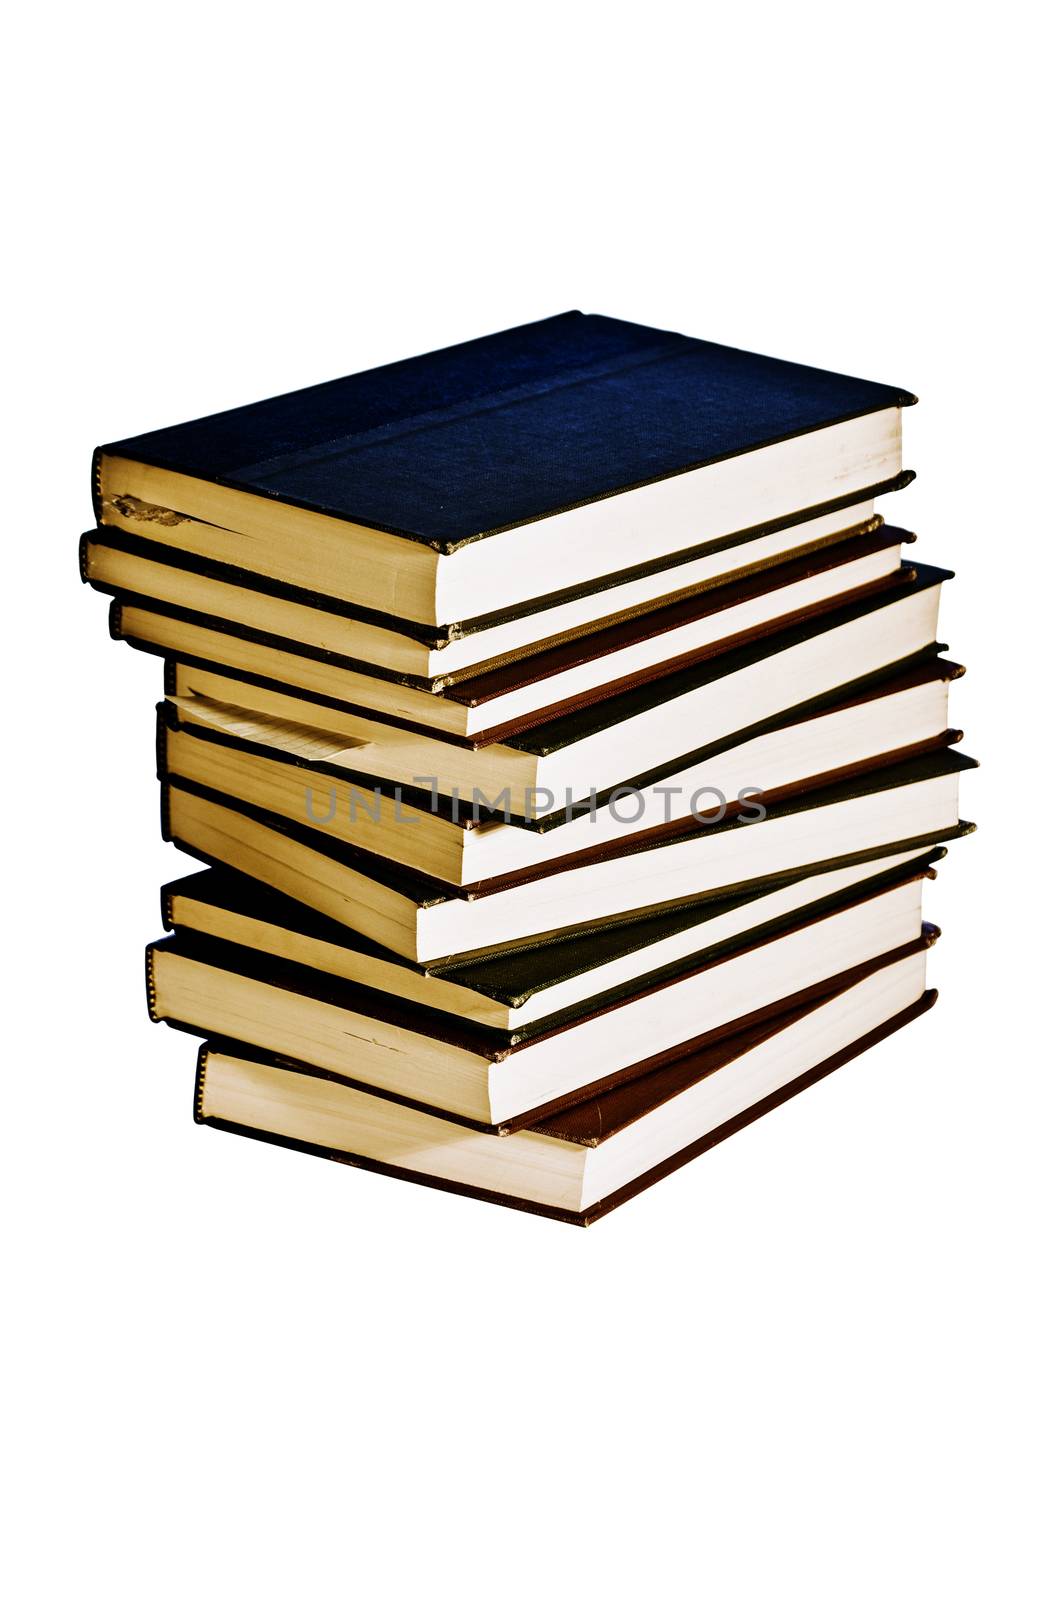 Plenty of reading here. Isolated on a white background.